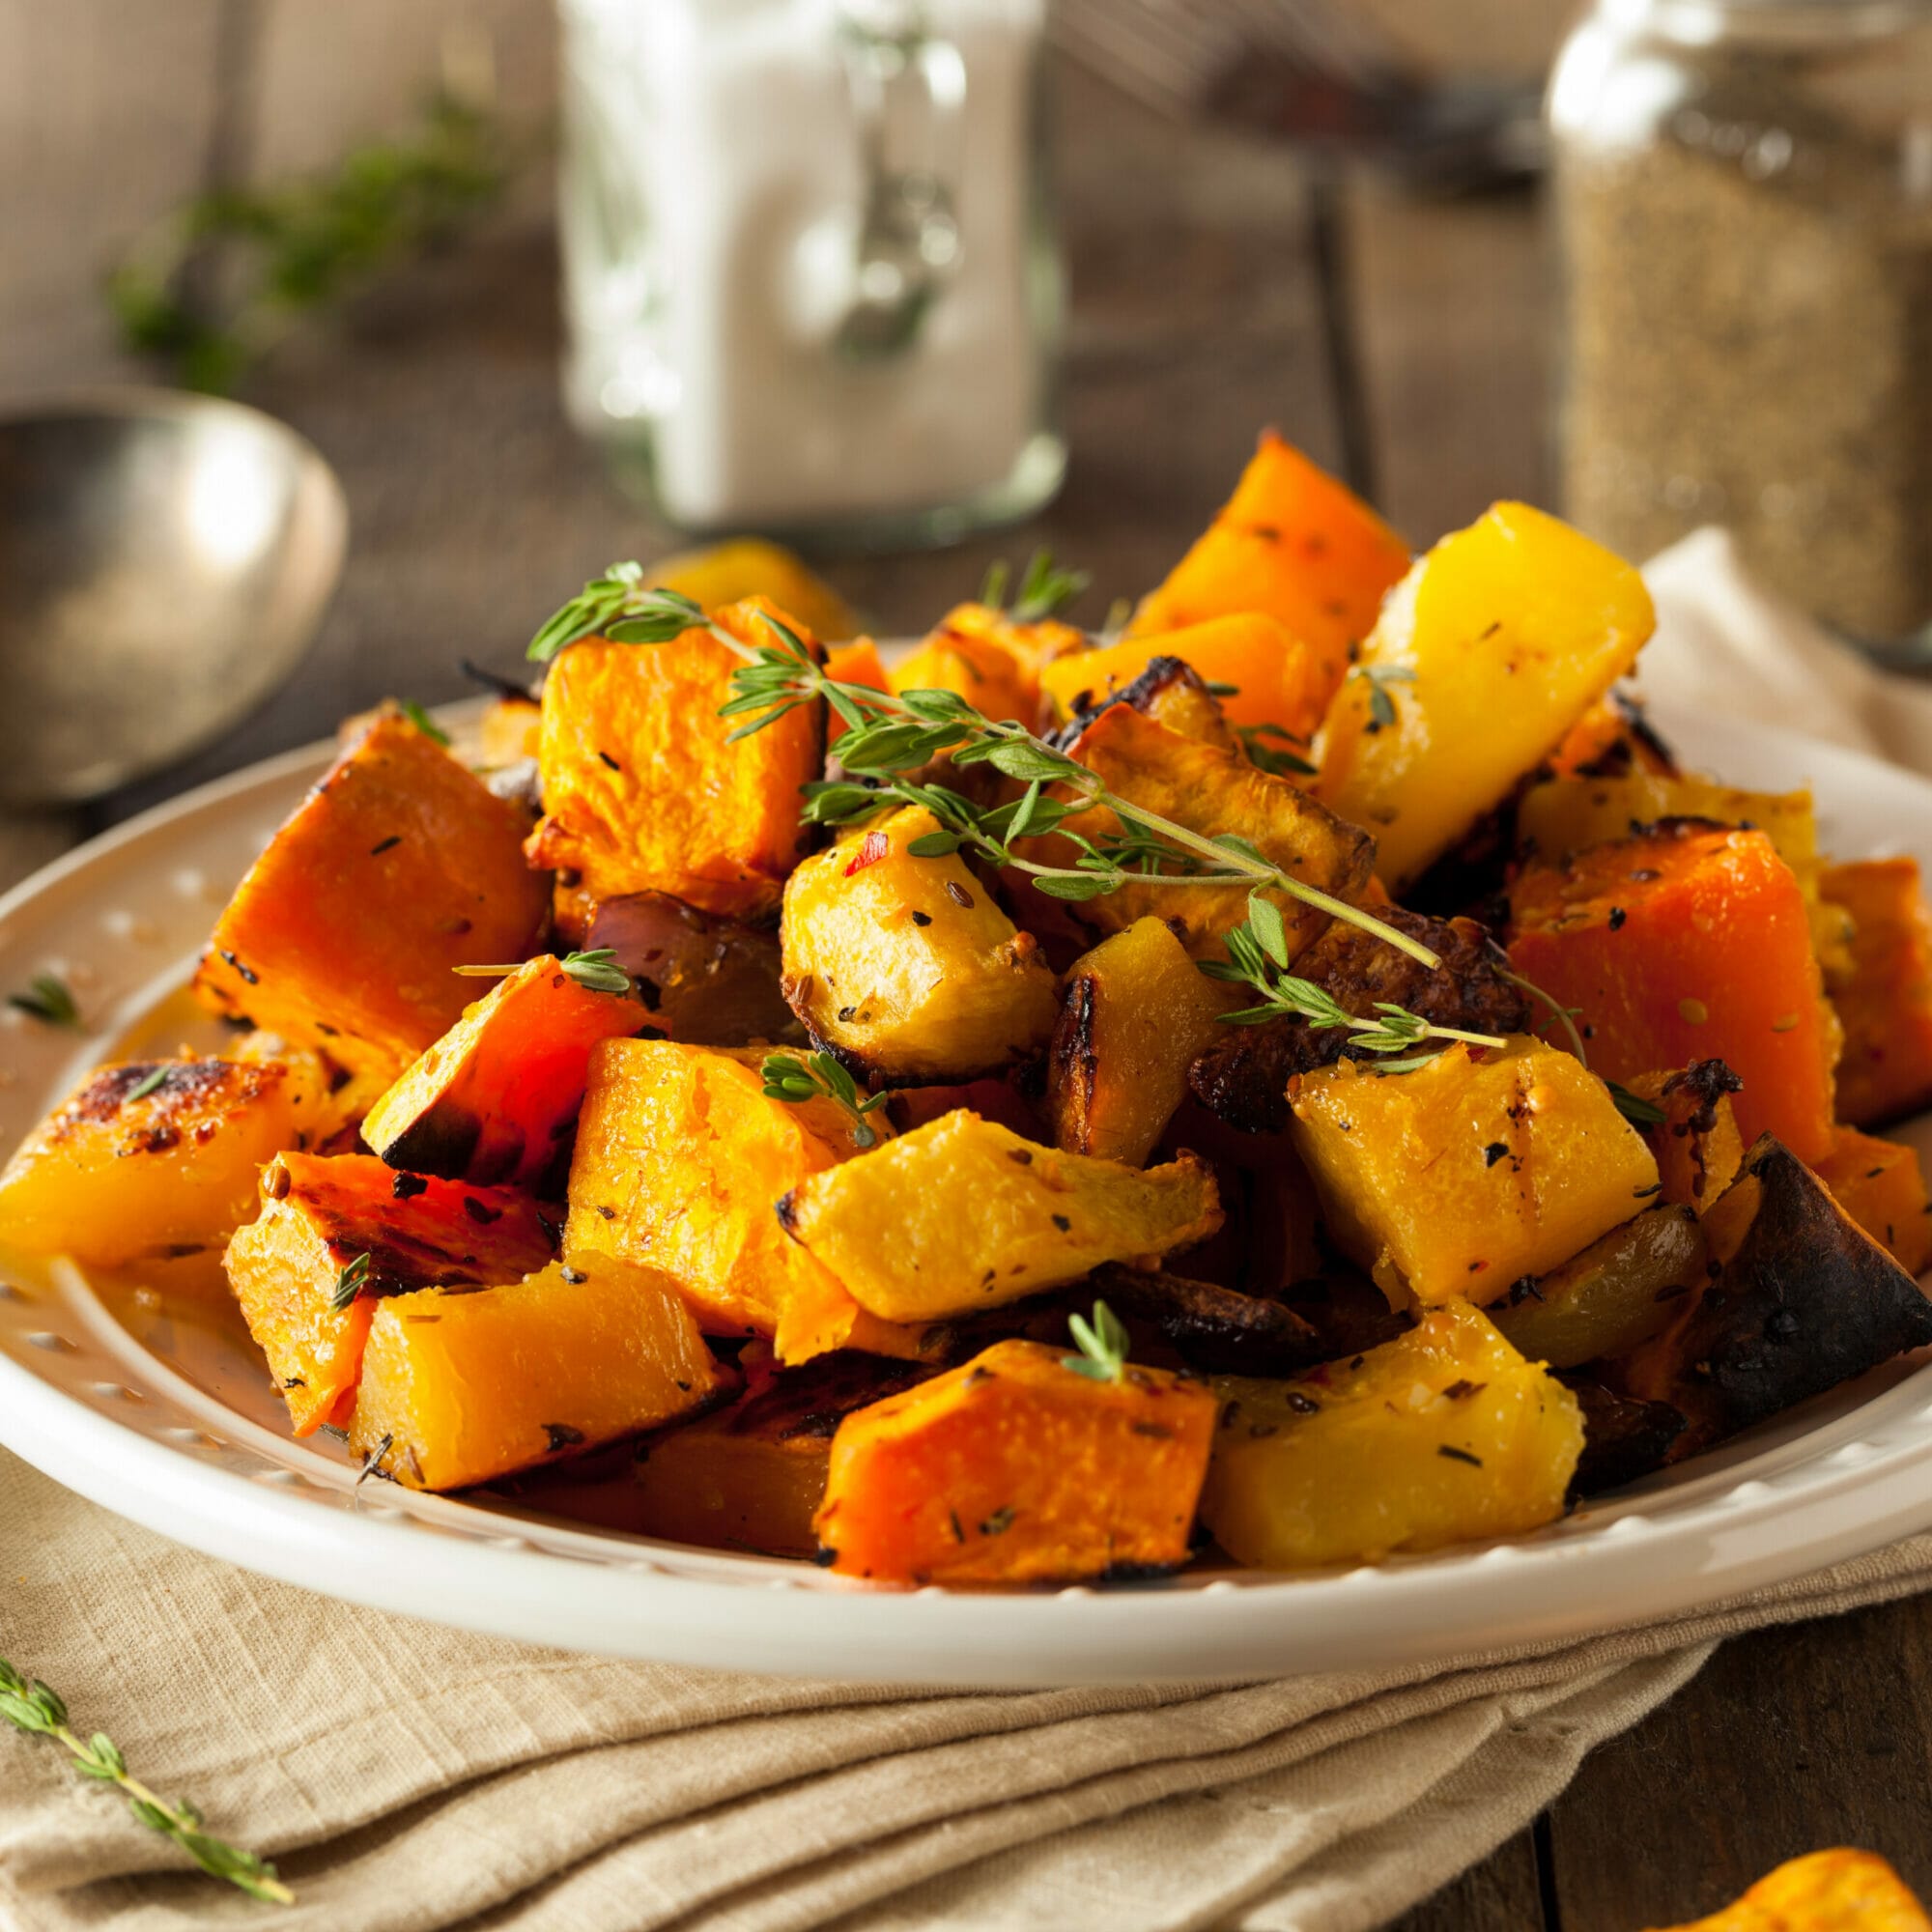 How to Make Easy Roasted Root Vegetables